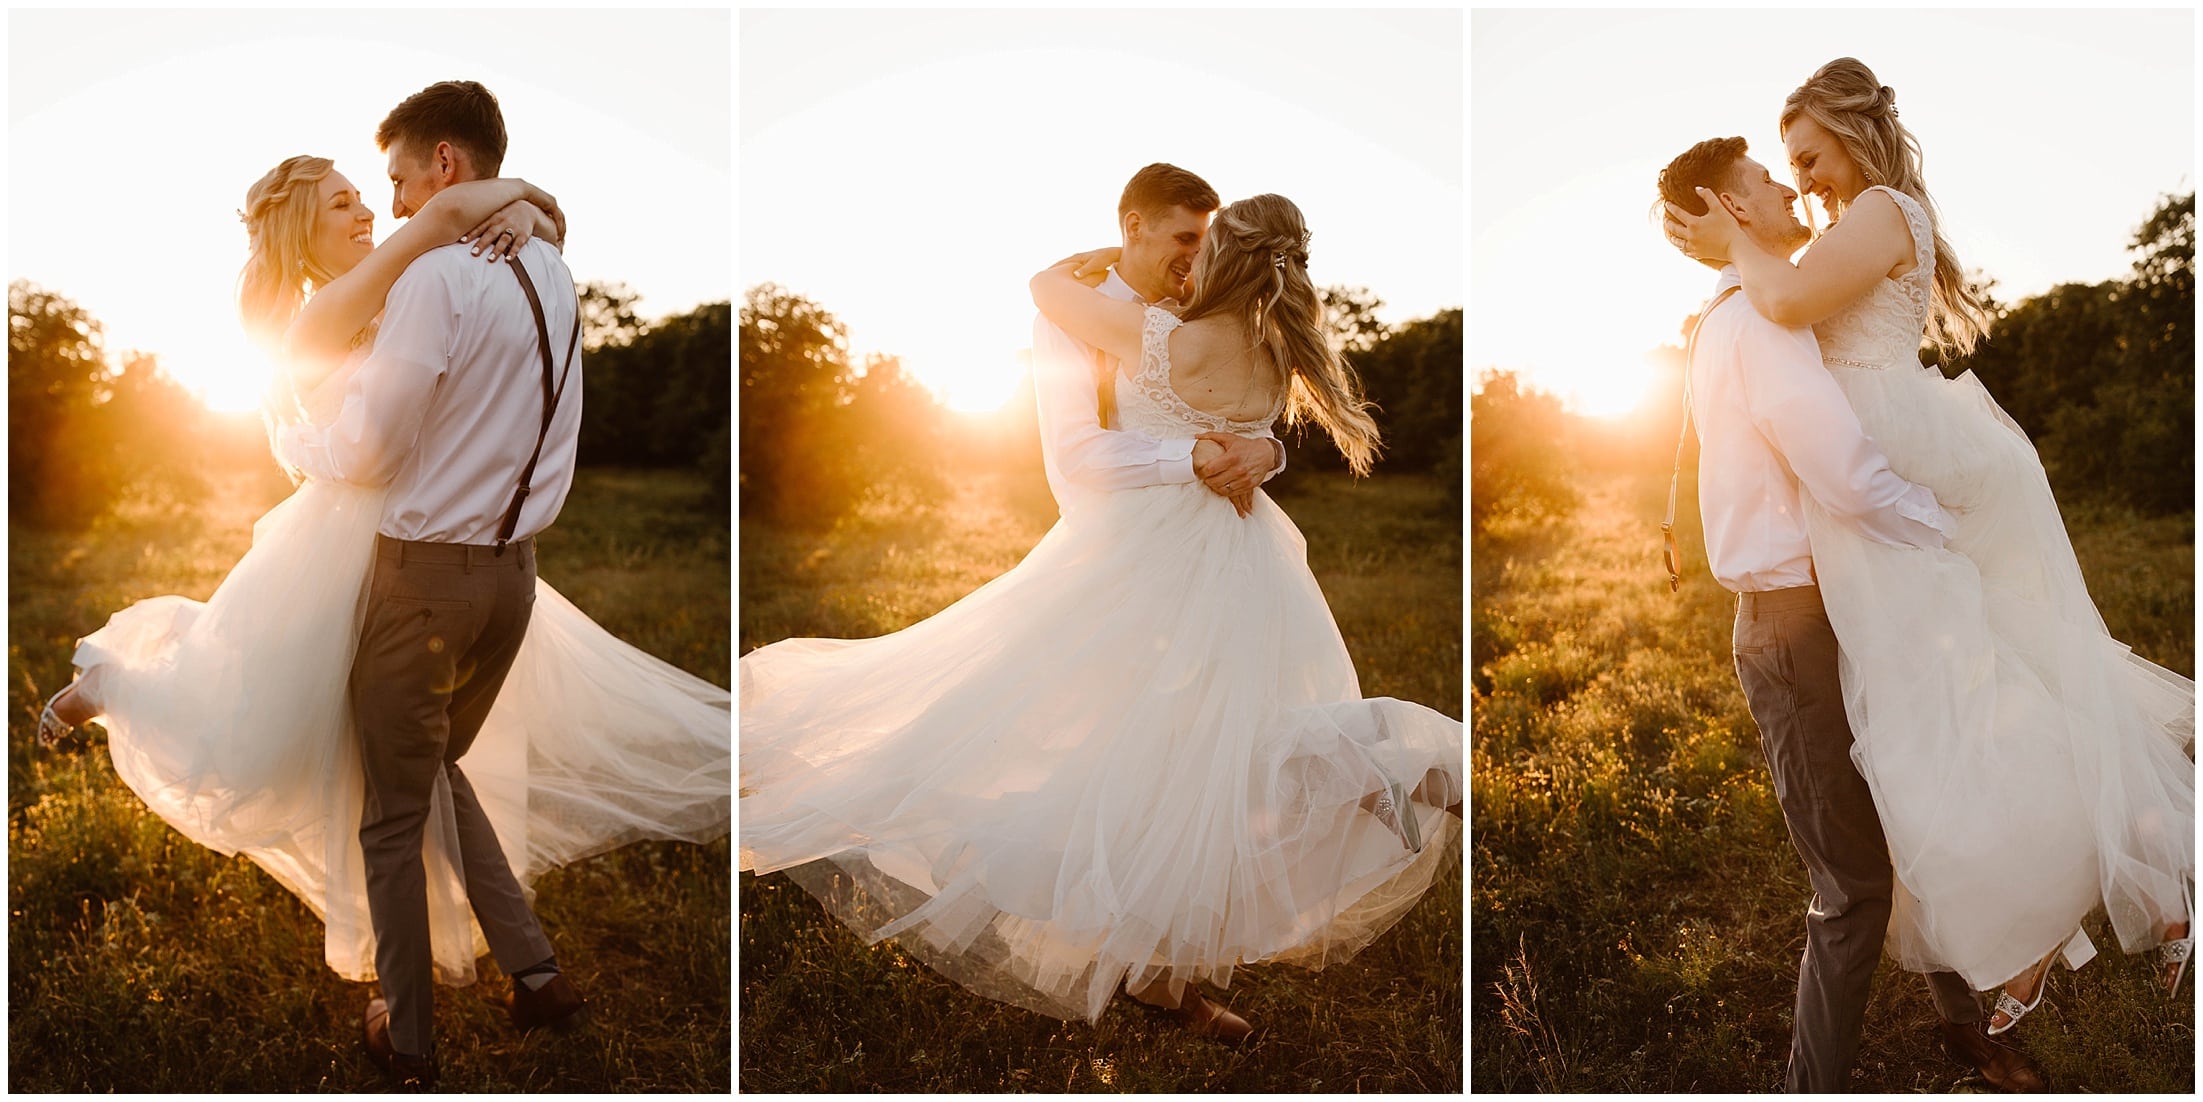 bride and groom intimate photos in texas sunset field,, groom picks up bride and spins her, Brit Nicole Photography, West Texas Barn Wedding, West Texas Small Wedding, West Texas wedding venue, DJ Platinum, Vera Wang engagement ring, Zales Manly Bands wedding ring, David's Bridal wedding dress, Krazy Cakes brides wedding cake, wedding cupcake, Betsey Johnson wedding high heels, Joy's Downtown Flowers wedding decor, Sparrow Creek Ranch, texas wedding ranch, places to get married in Texas, small intimate wedding, summer wedding, texas sky, bride and groom first look, first look with dad, matching bridesmaids robes, June wedding, junebug weddings, wandering weddings, the knot, best weddings